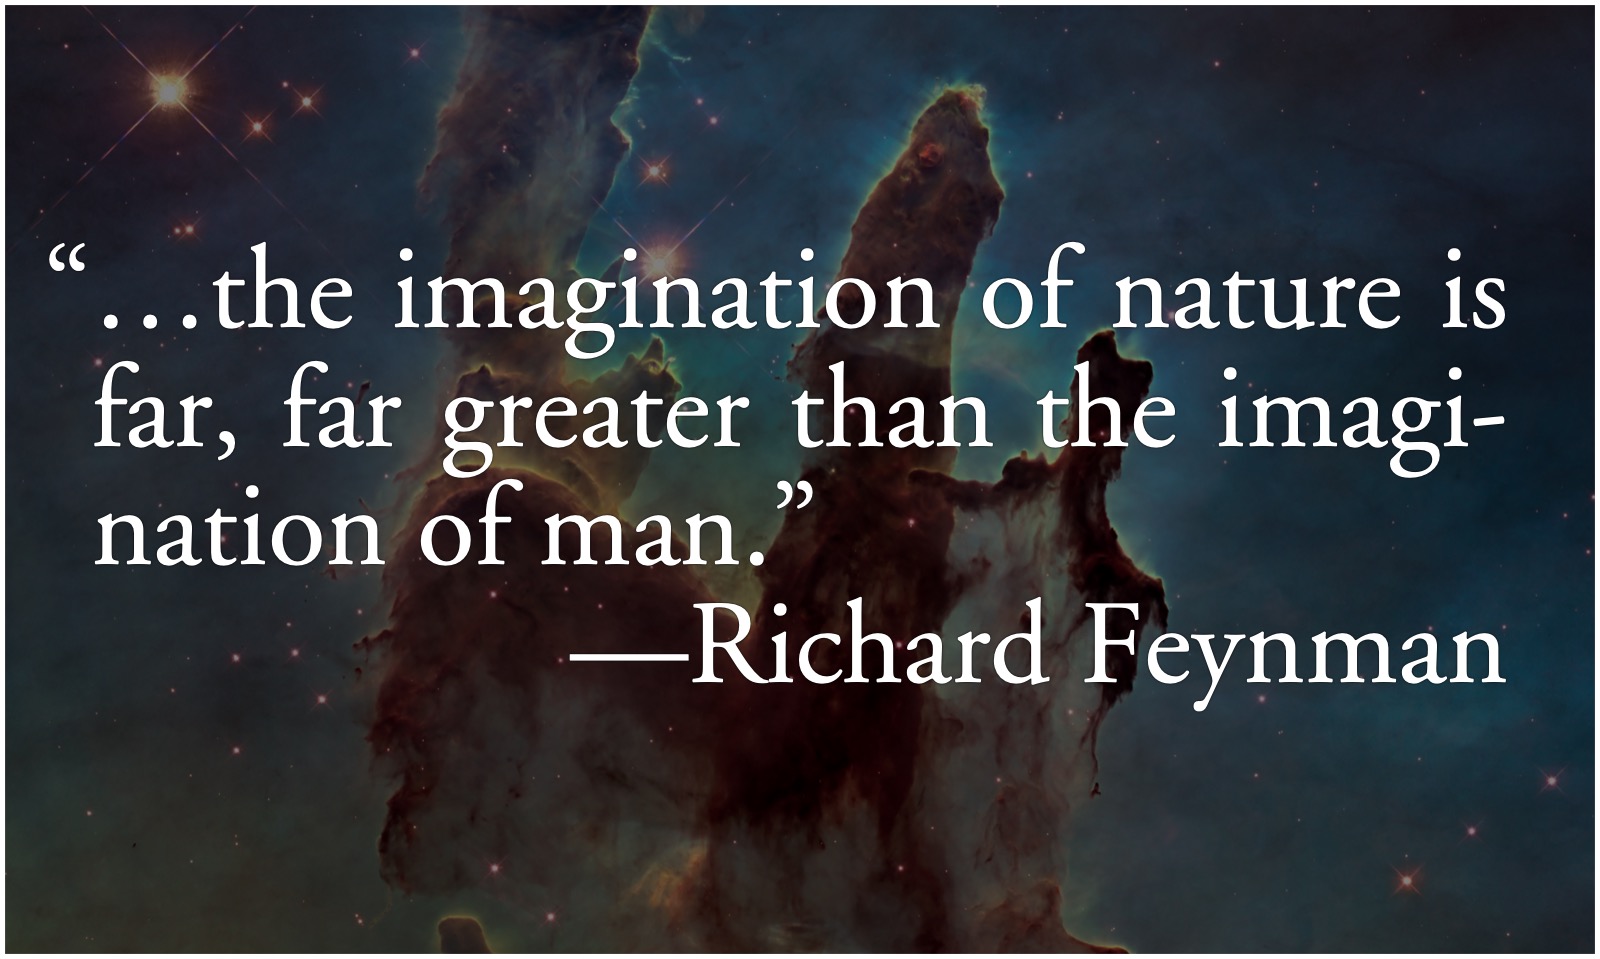 Feynman: Imagination of nature: “…the imagination of nature is far, far greater than the imagination of man.”—Richard Feynman, What Do You Care What Other People Think?, p. 242 over the Pillars of Creation.; astronomy; science; Richard Feynman; Mother Nature